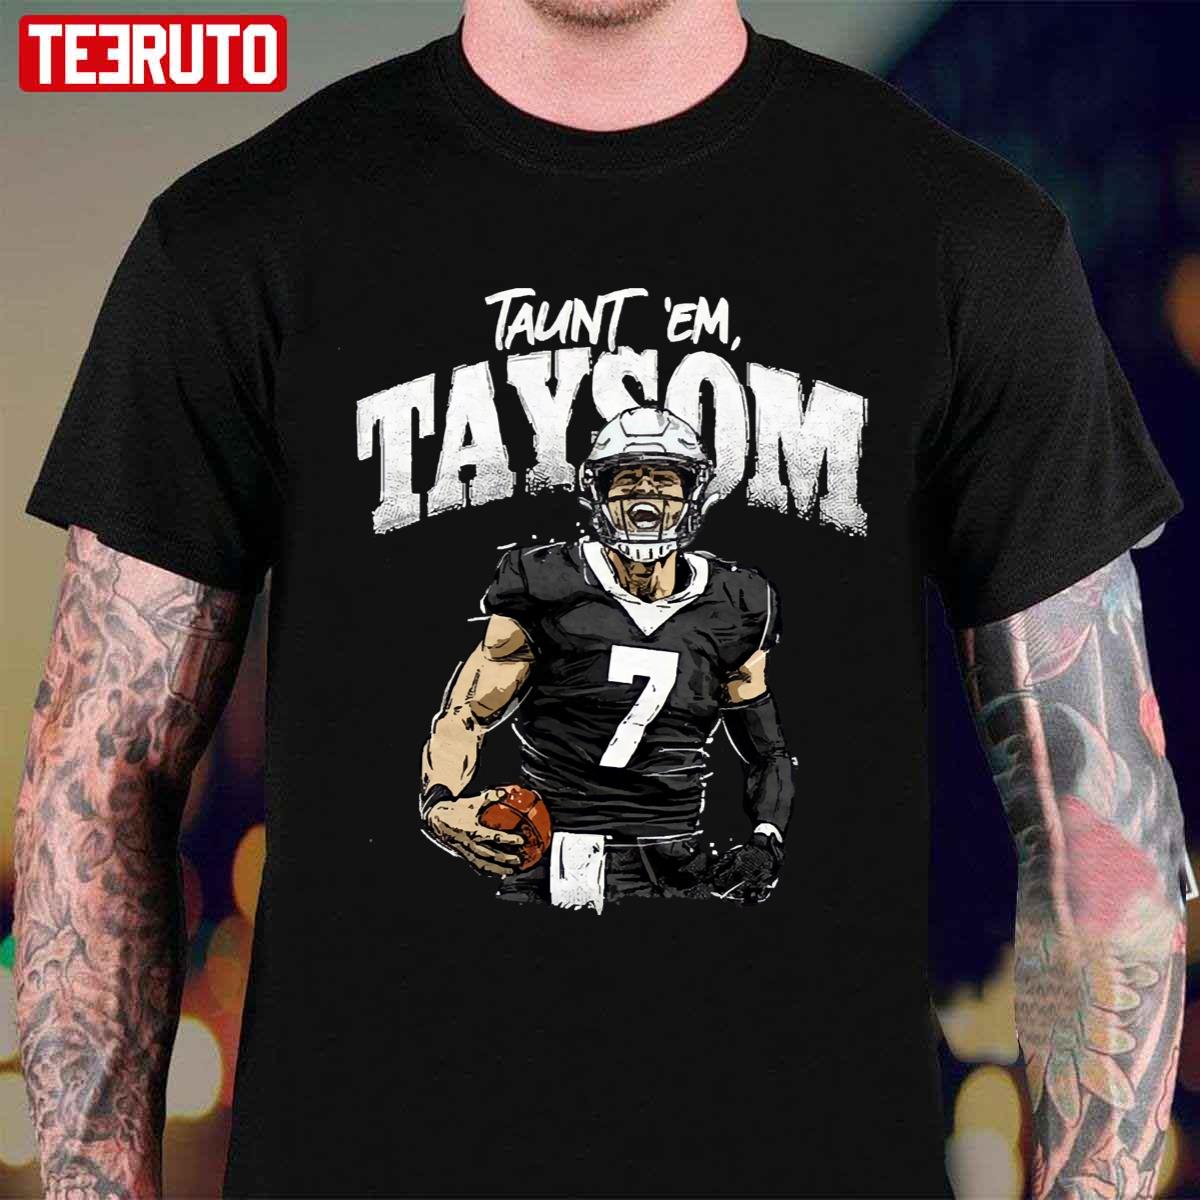 Taysom Hill For New Orleans Saints Unisex T-Shirt